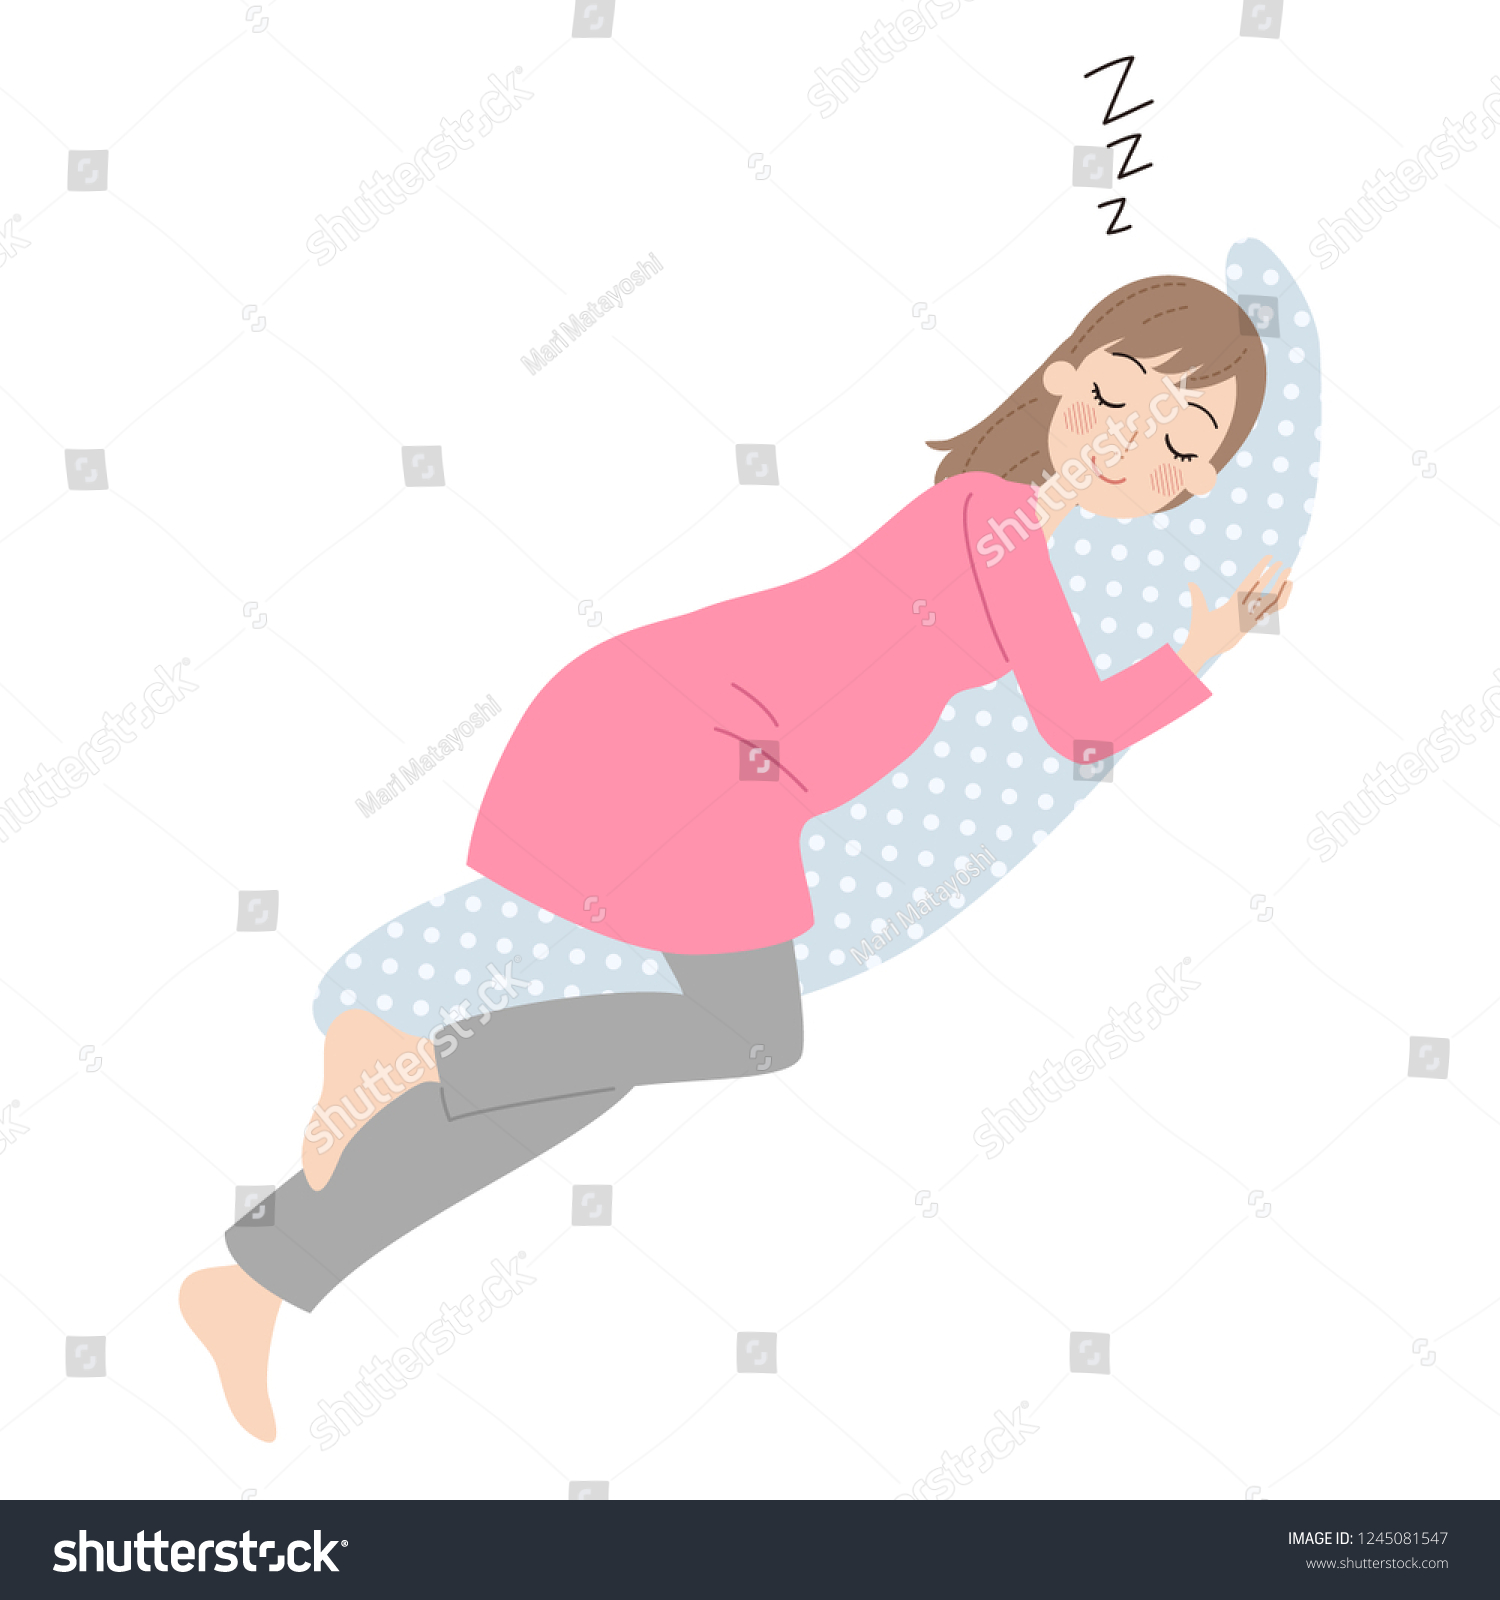 SVG of A pregnant woman who sleeps holding a pillow. svg